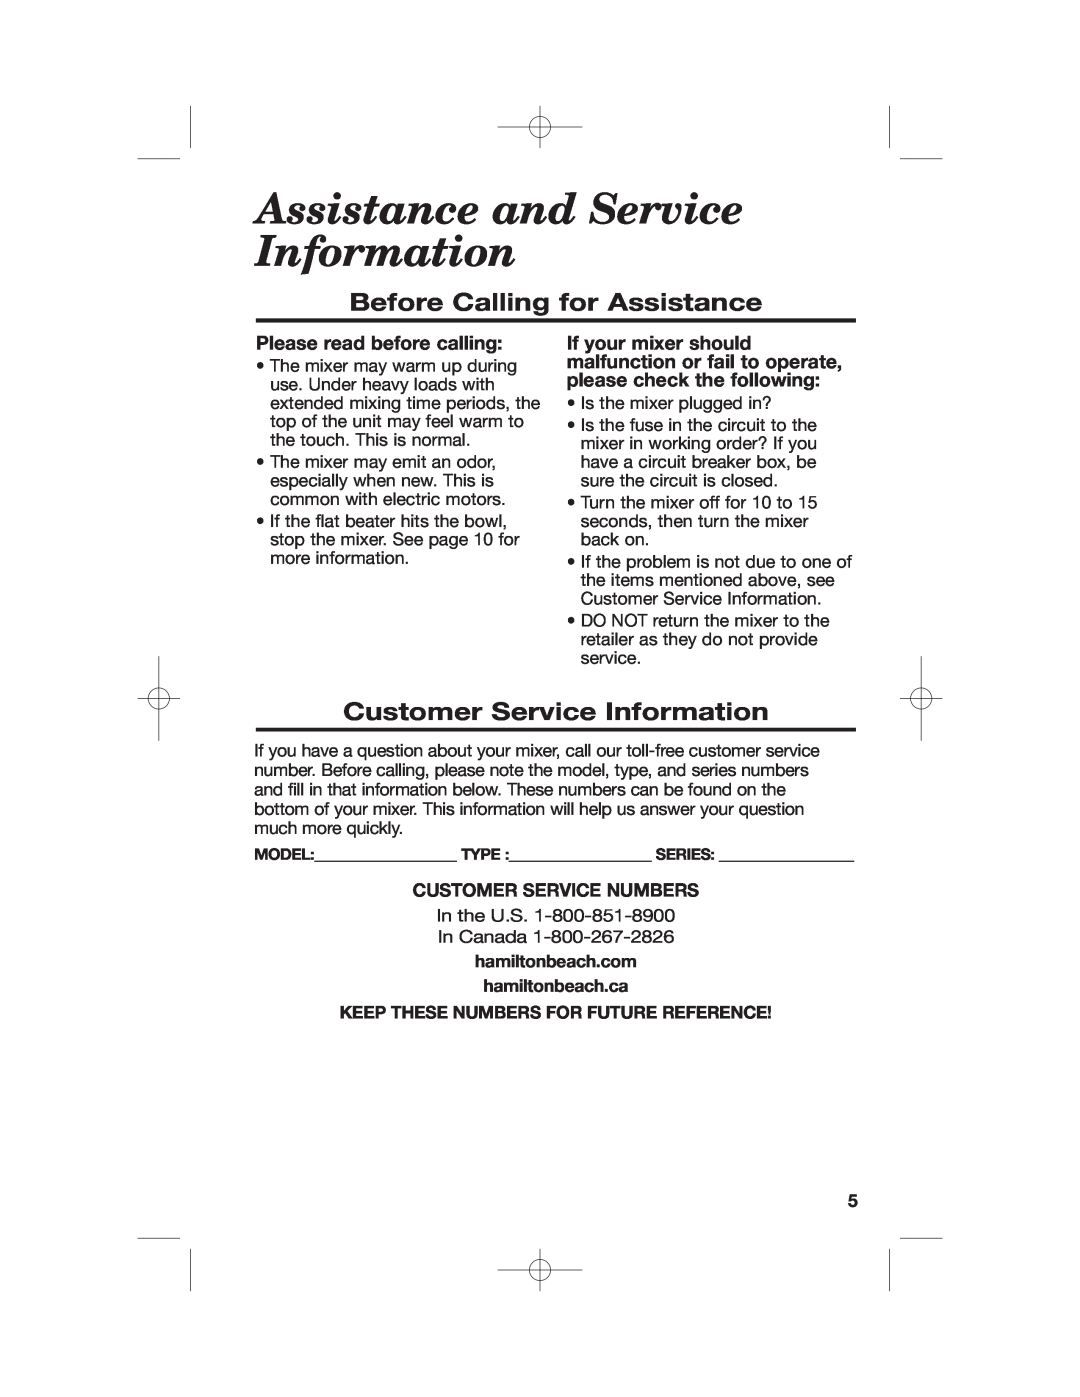 Hamilton Beach Stand Mixer Assistance and Service Information, Before Calling for Assistance, Customer Service Information 